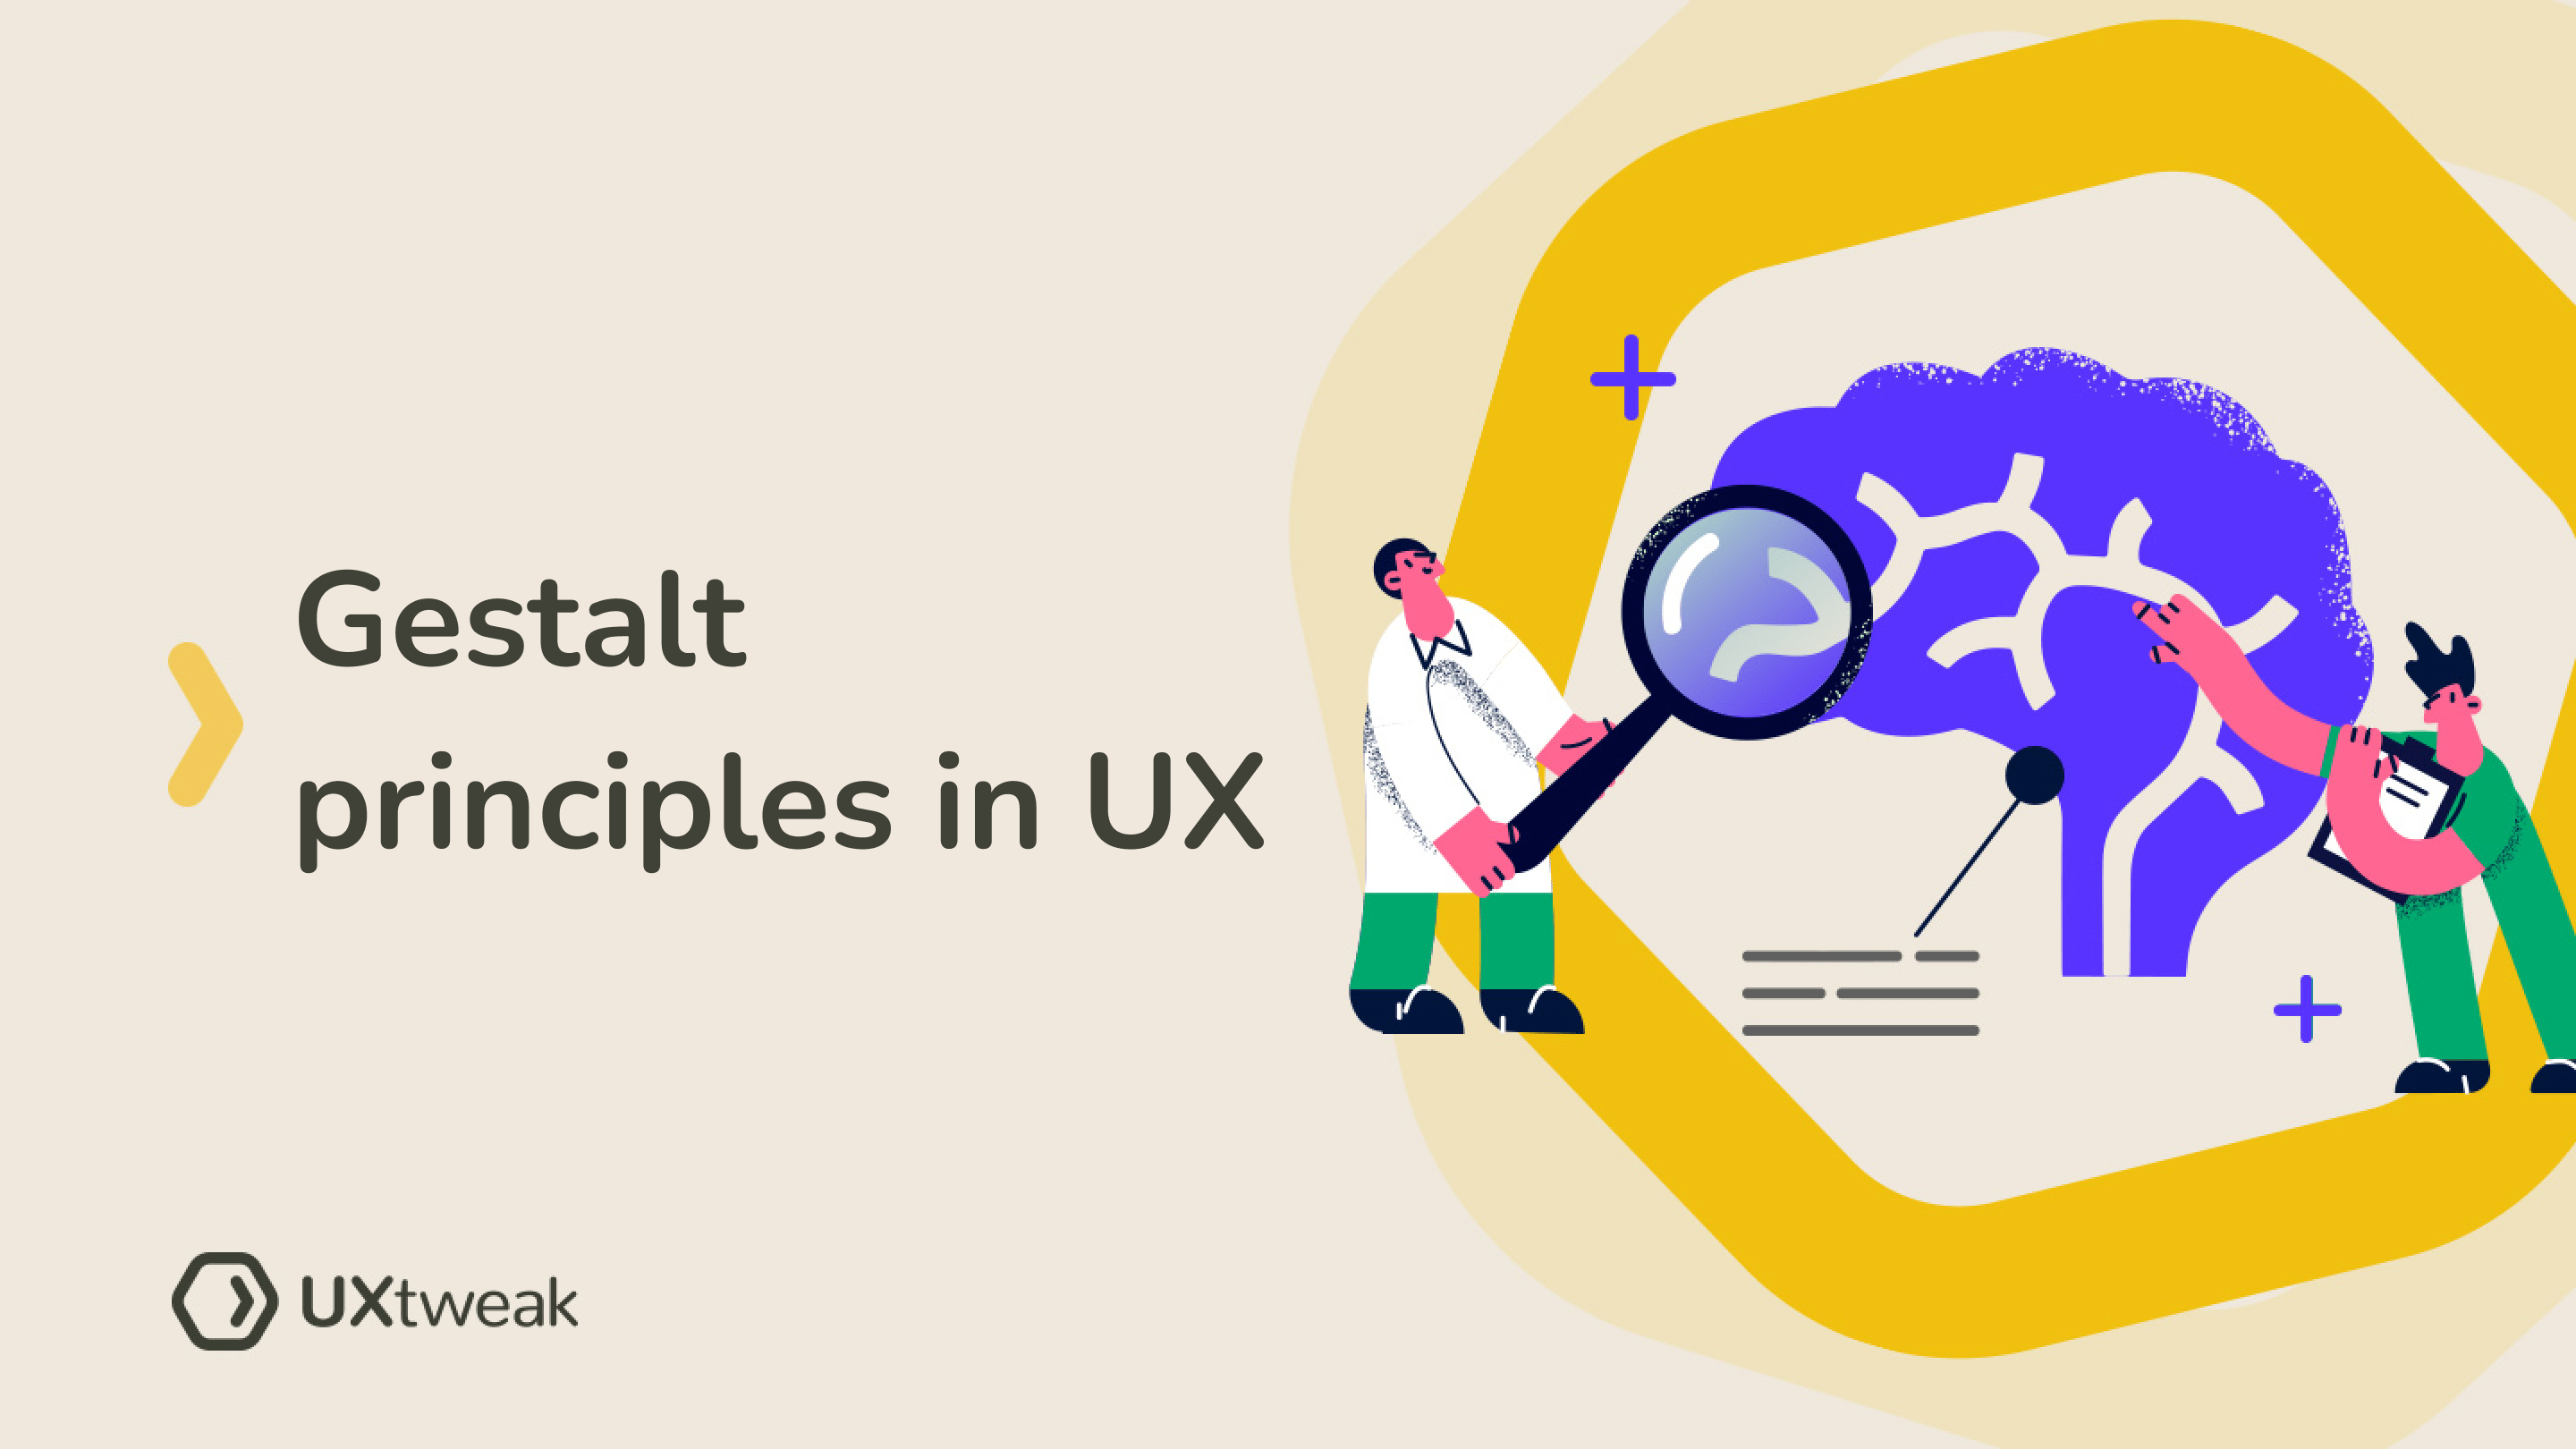 Gestalt principles and their effect on user experience